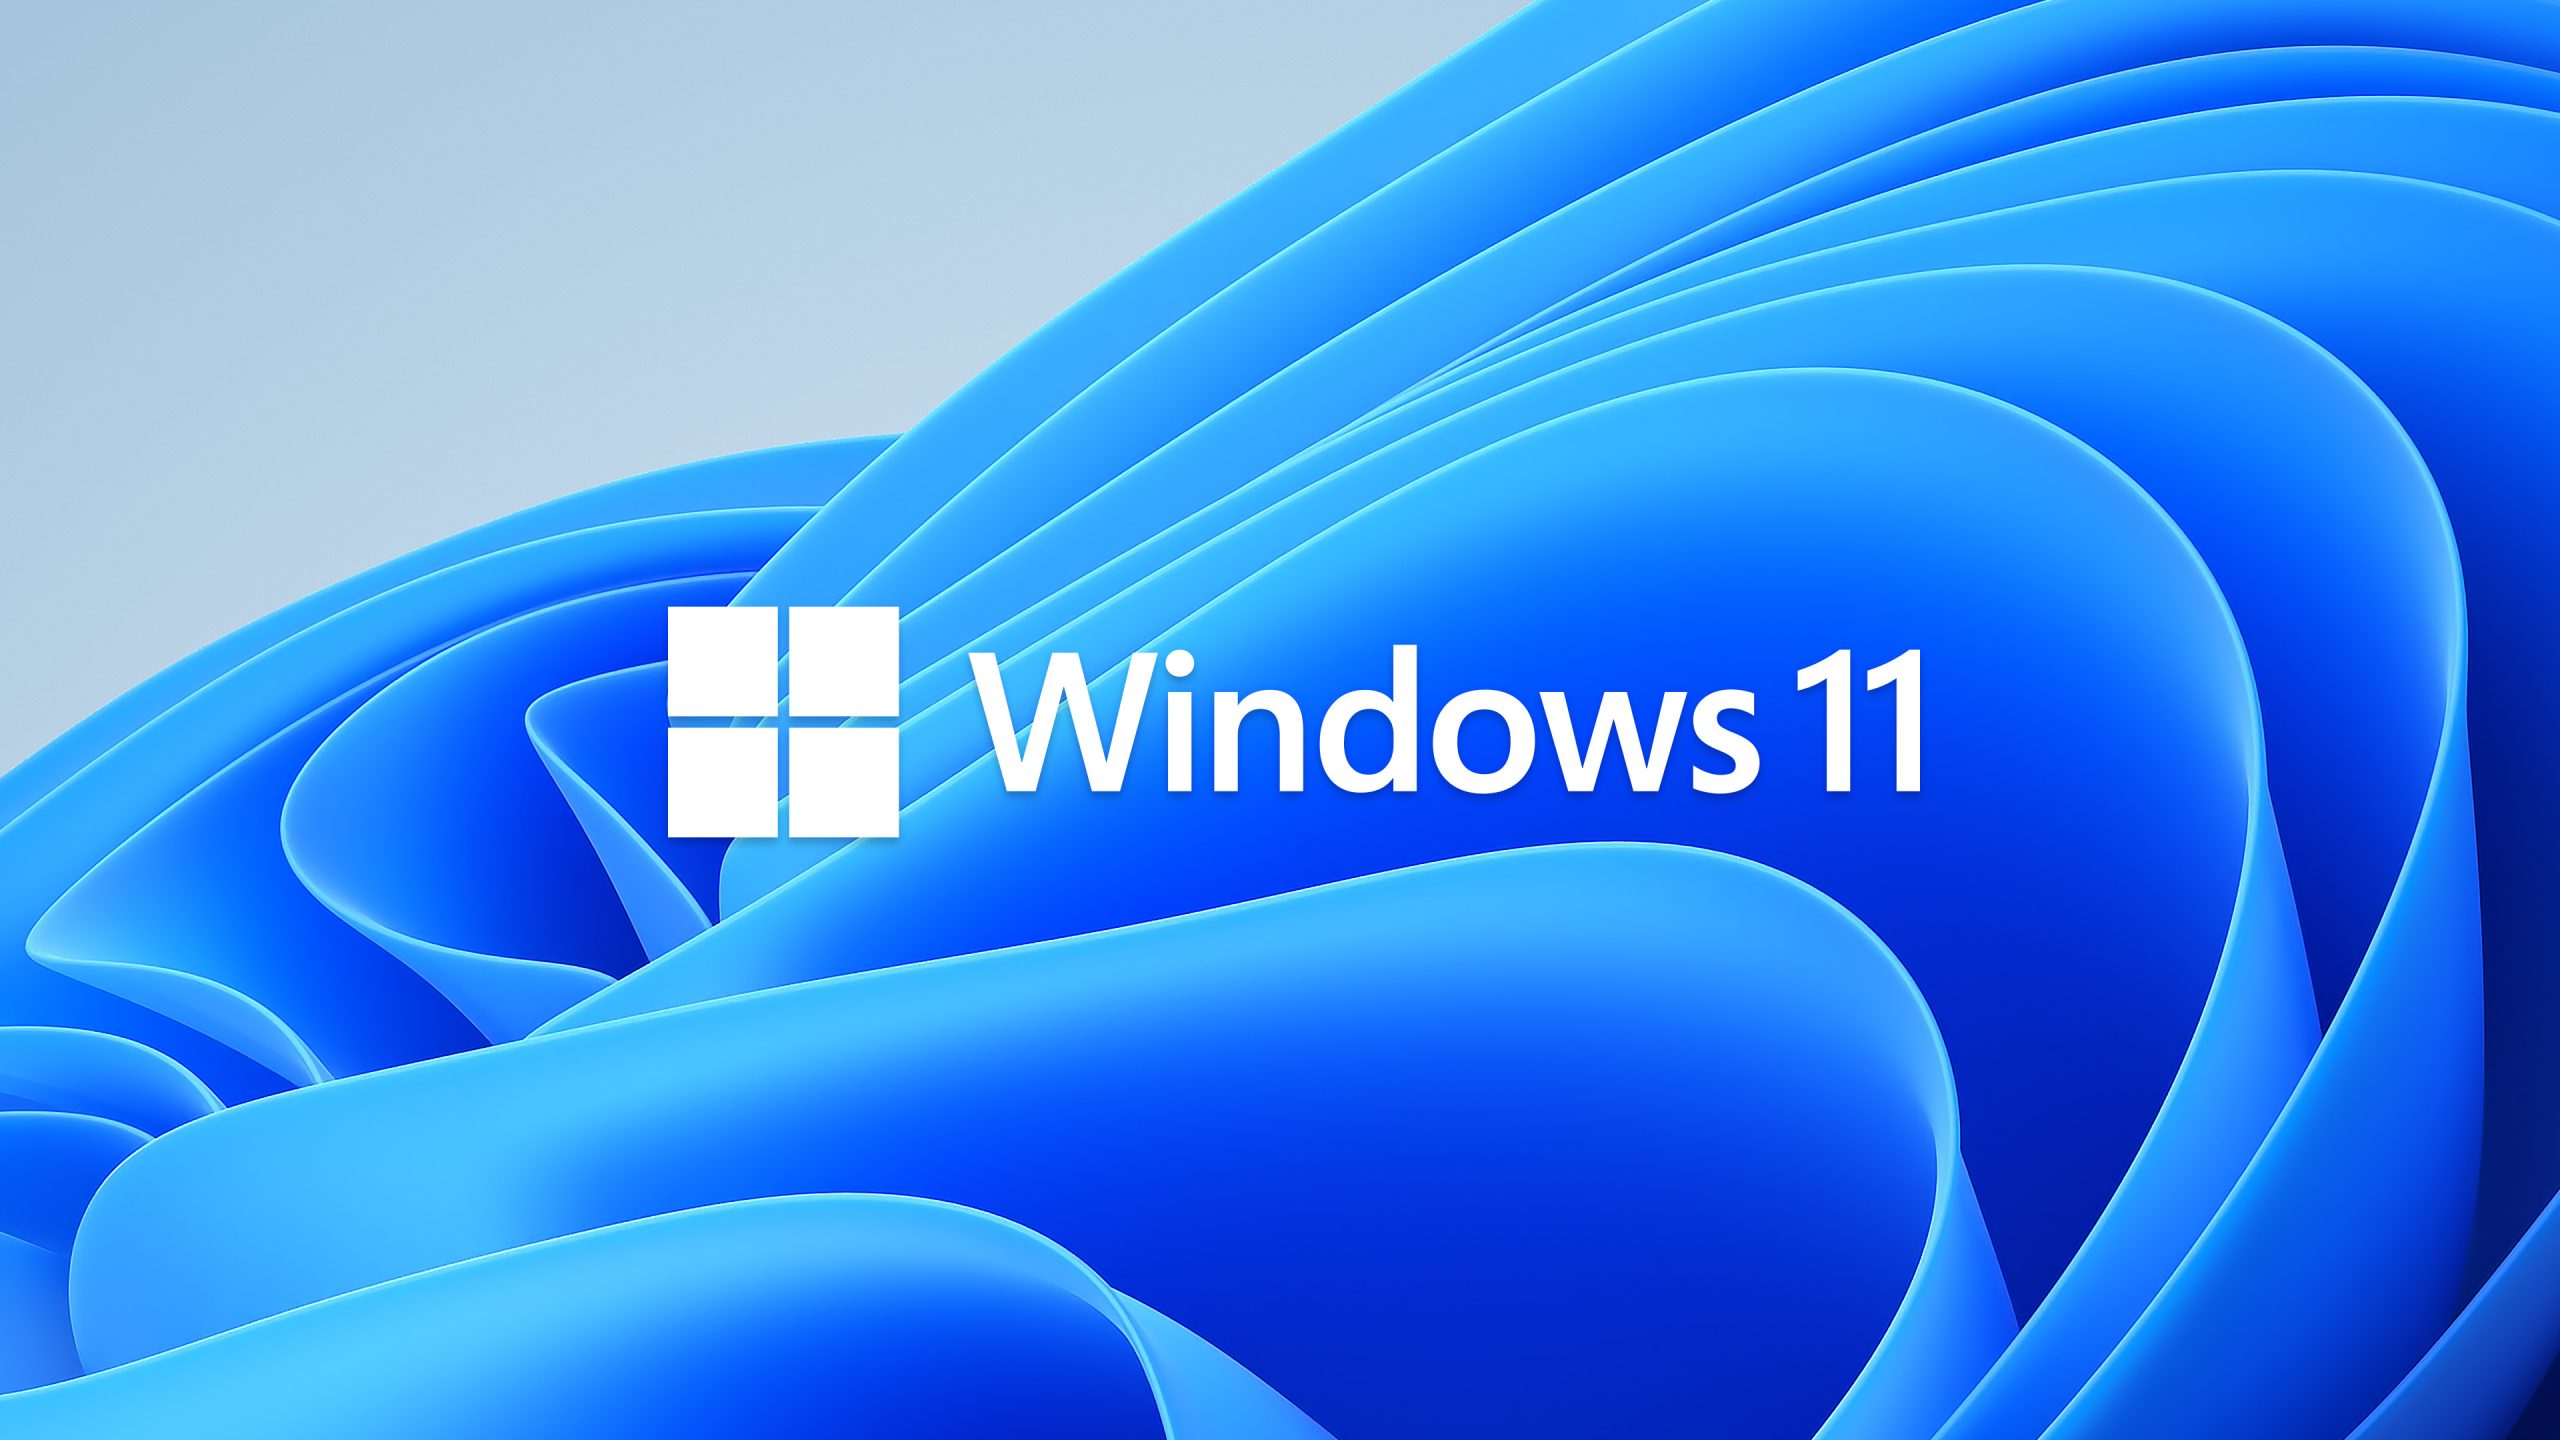 Windows-11-Download-ISO-64-Bit-With-Crack-Full-Latest-Version-2021-scaled